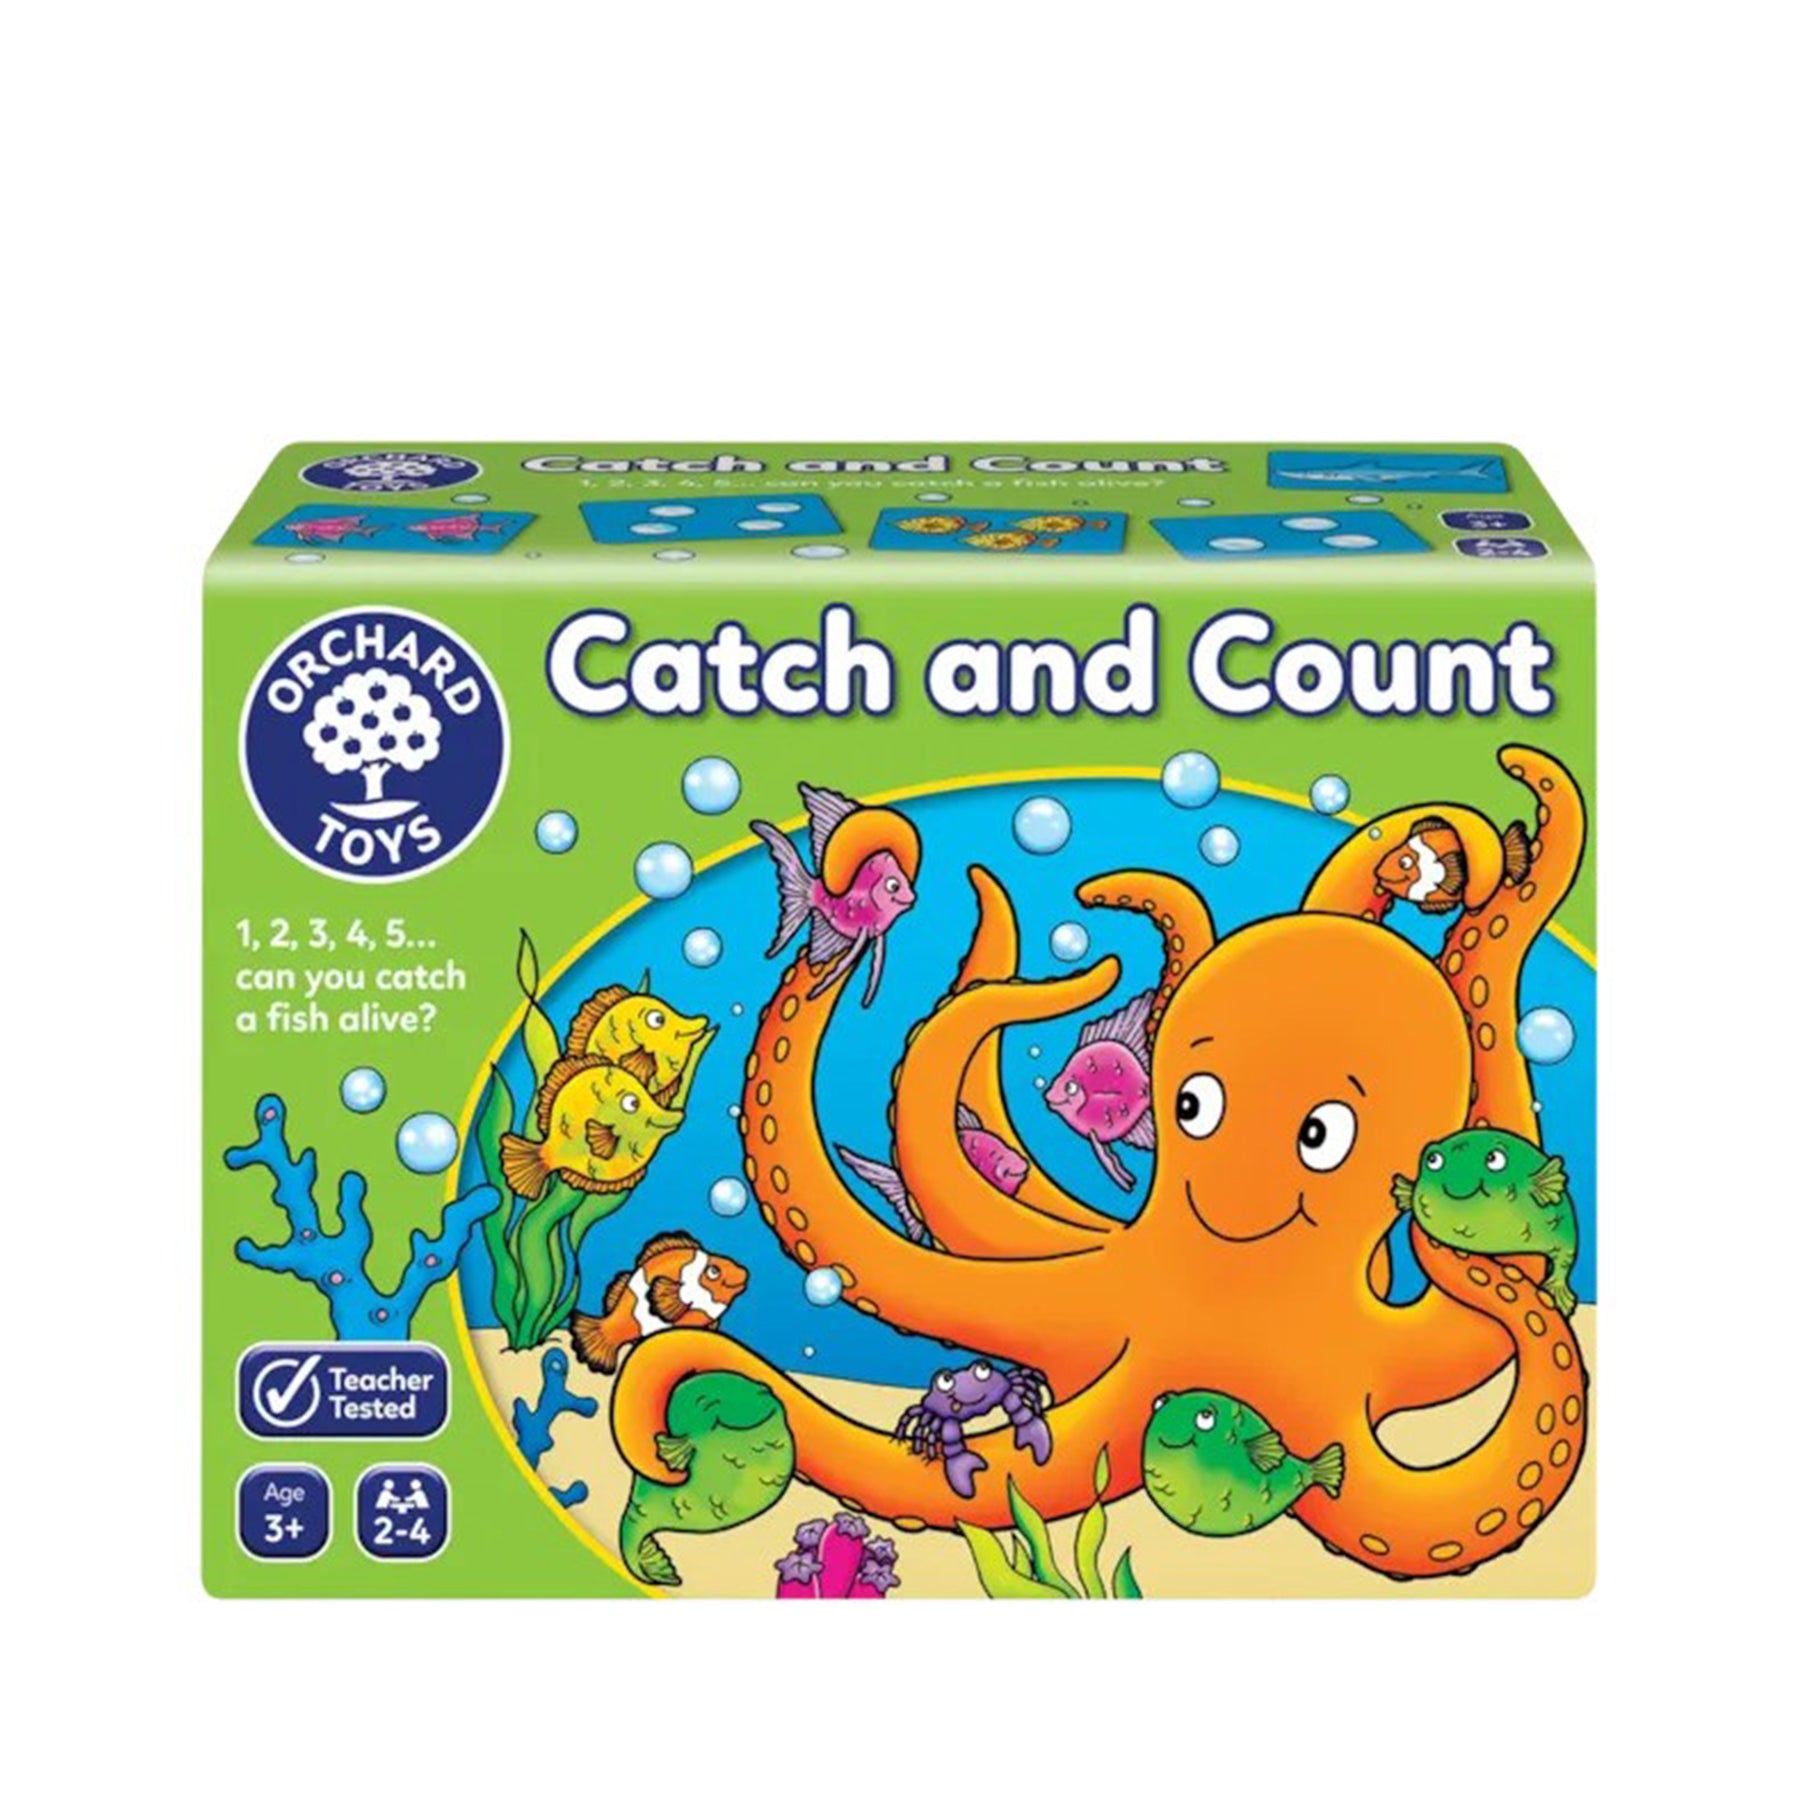 Catch and count game